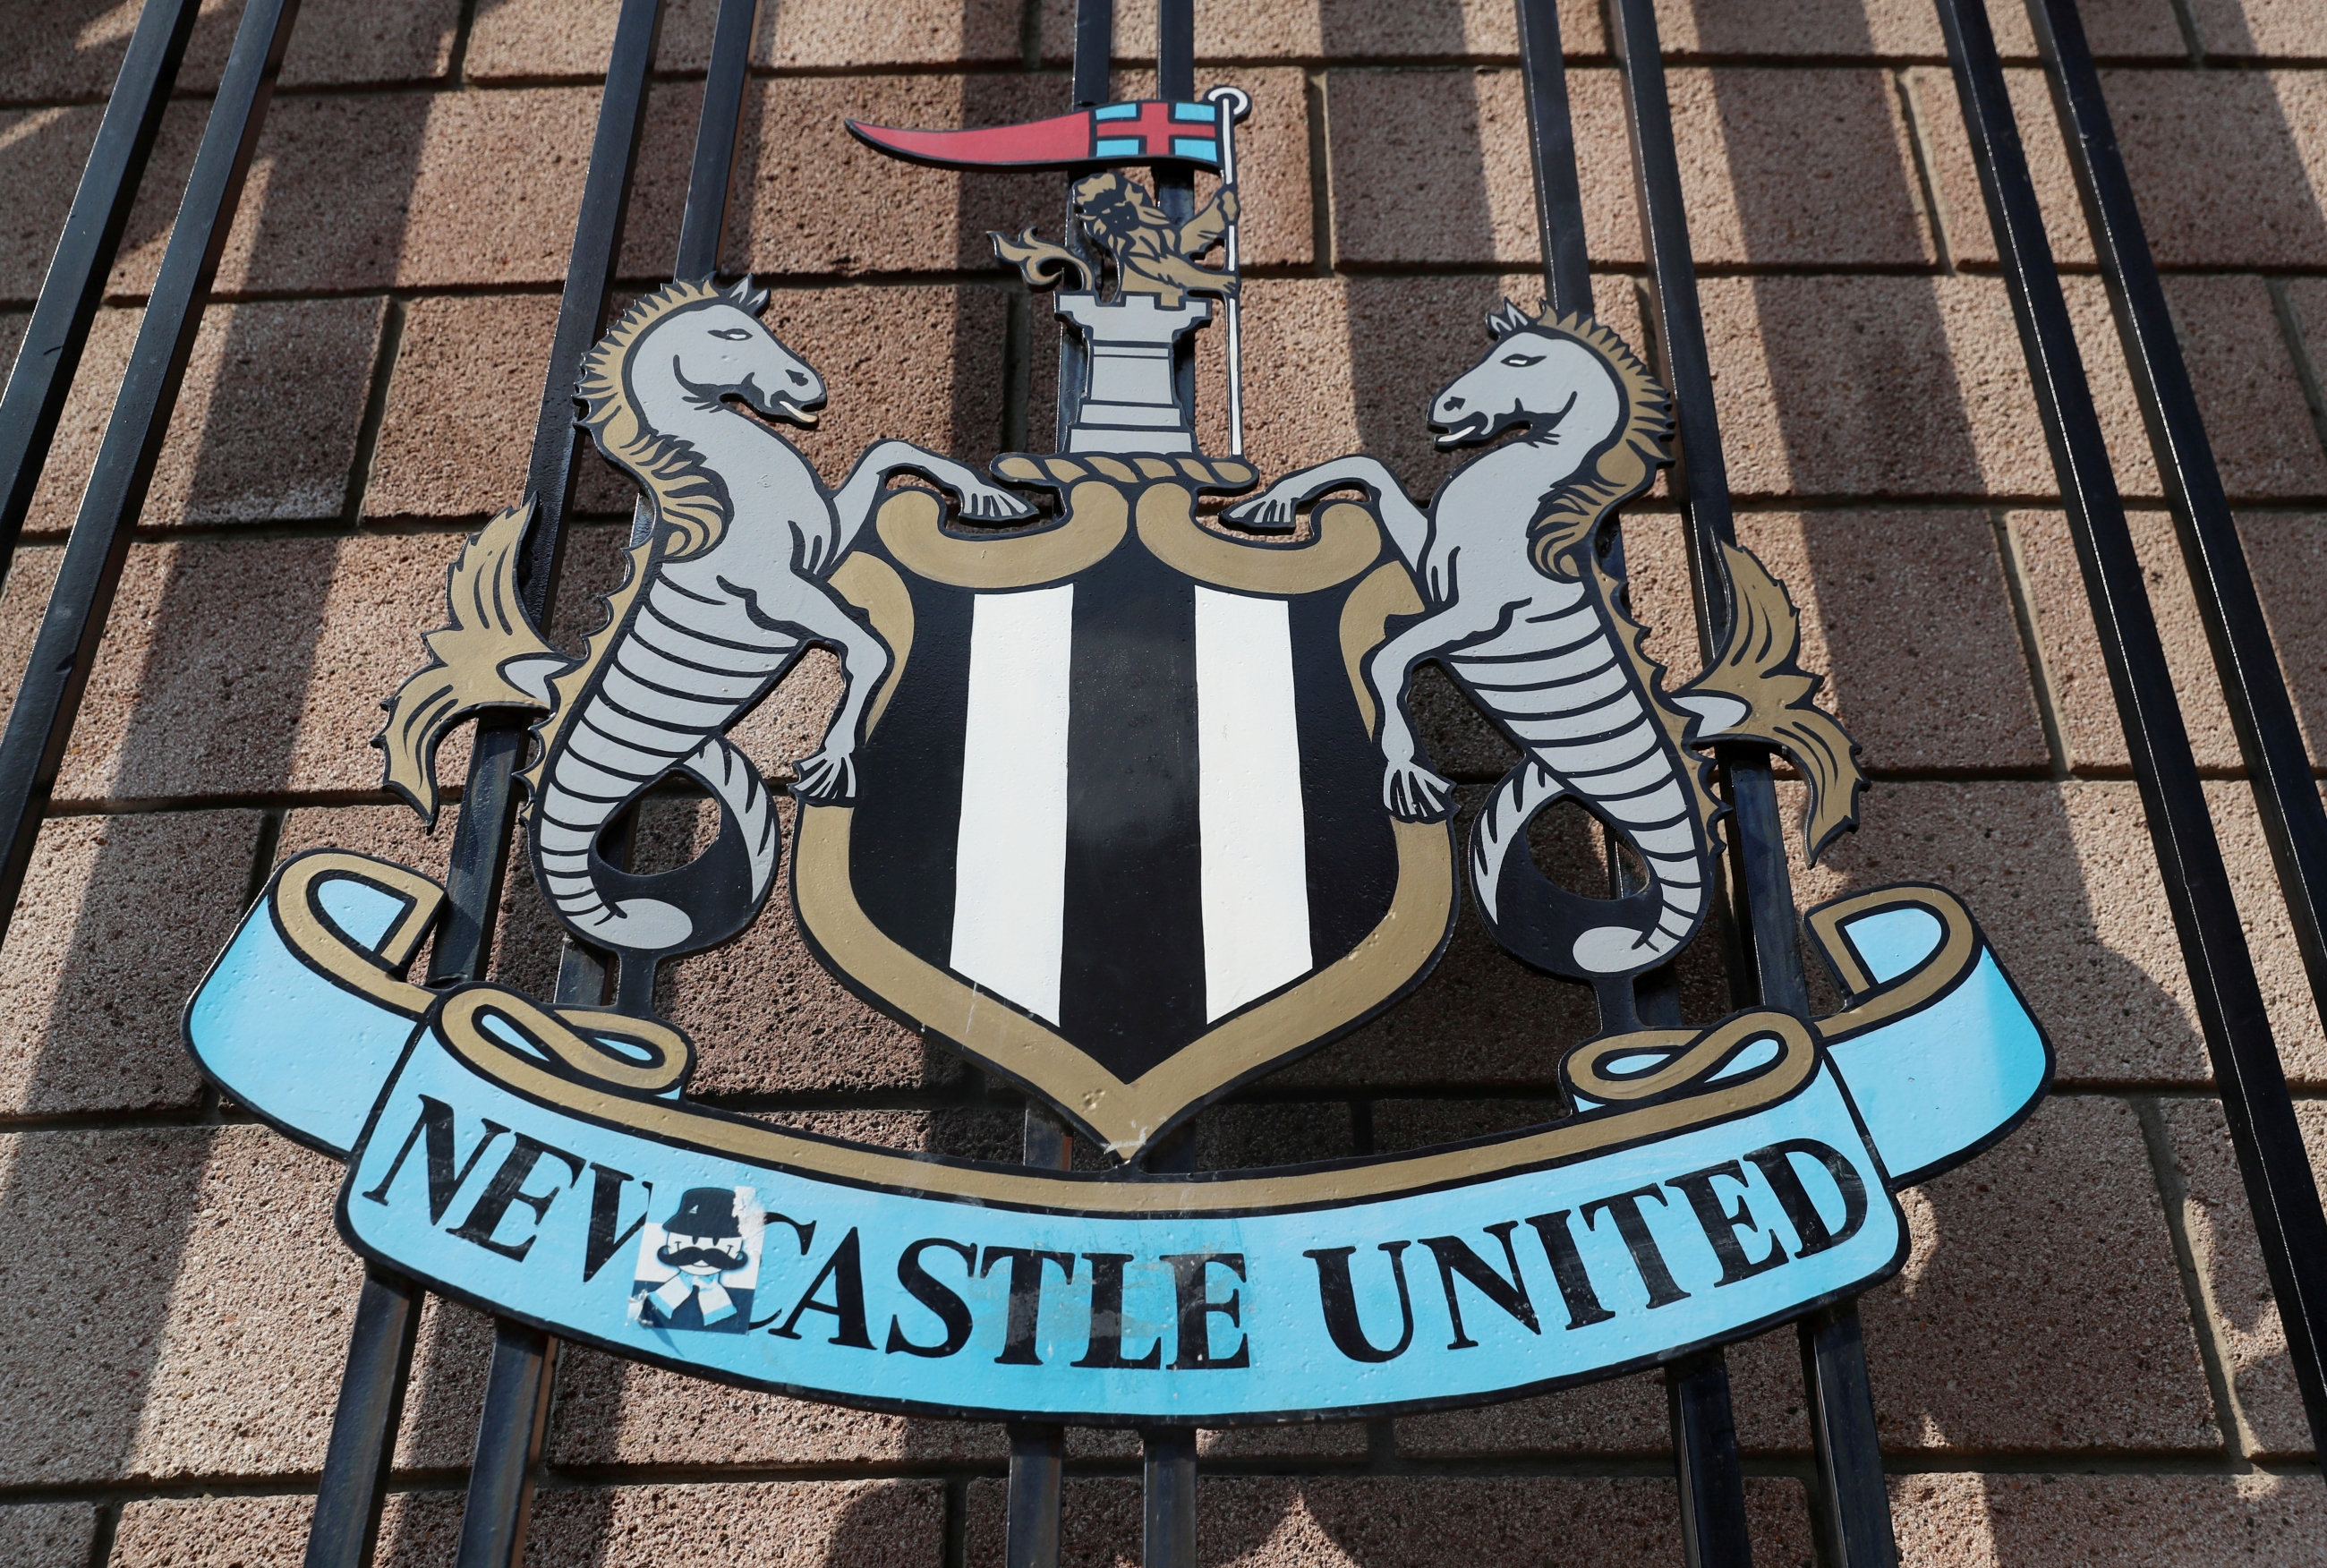 Newcastle United will play their first match of the 2020/21 season against West Ham on Saturday